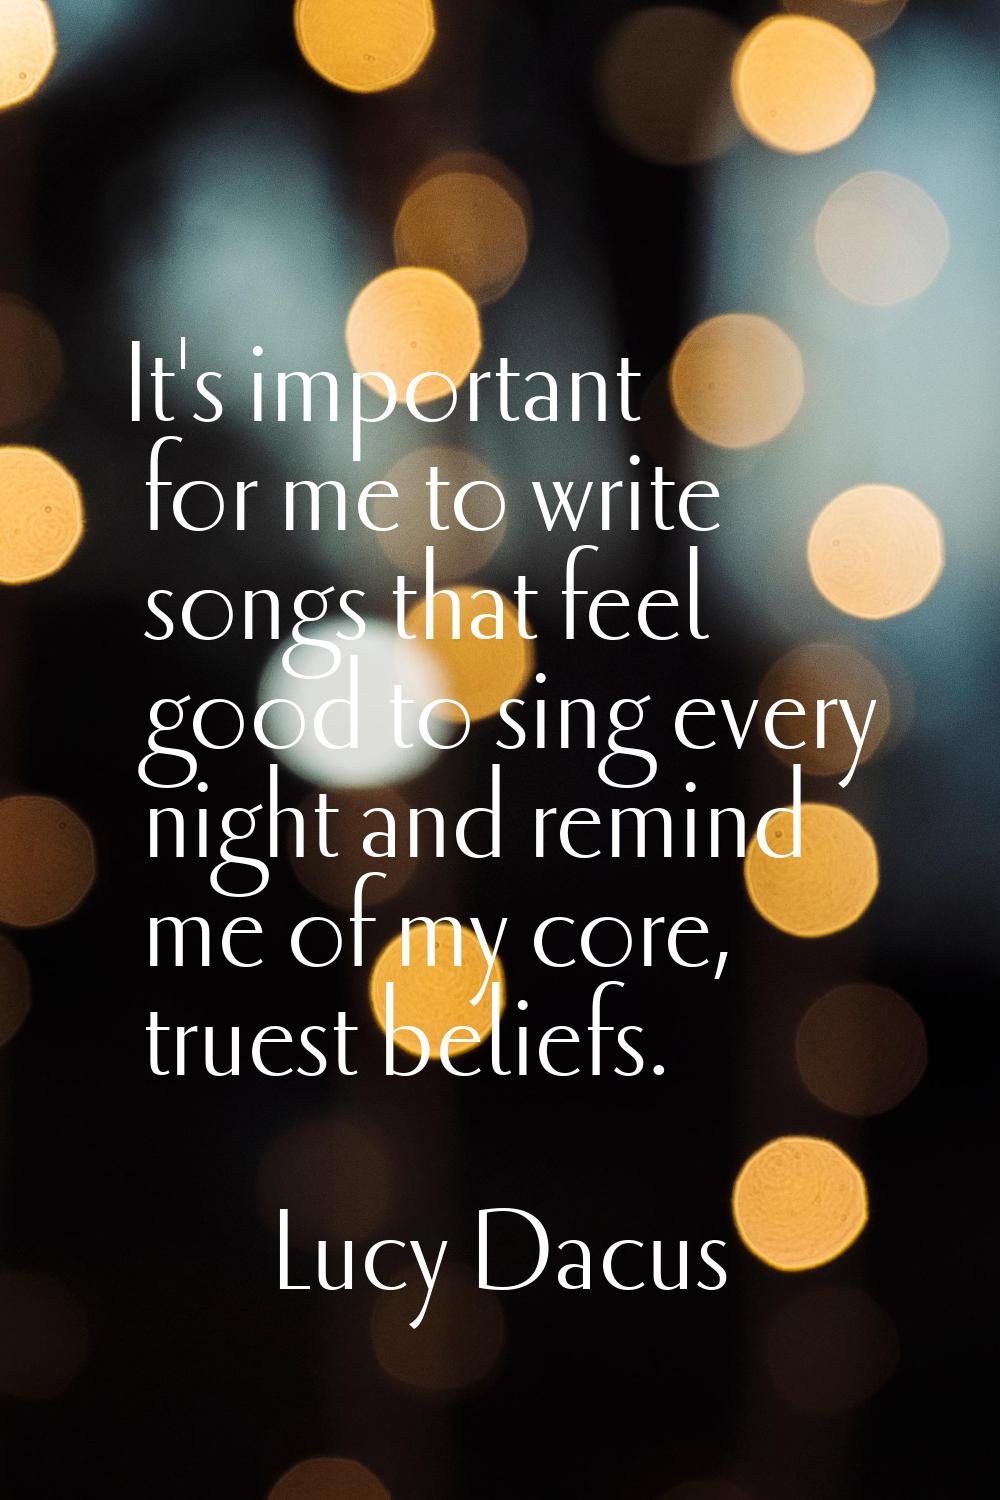 It's important for me to write songs that feel good to sing every night and remind me of my core, t